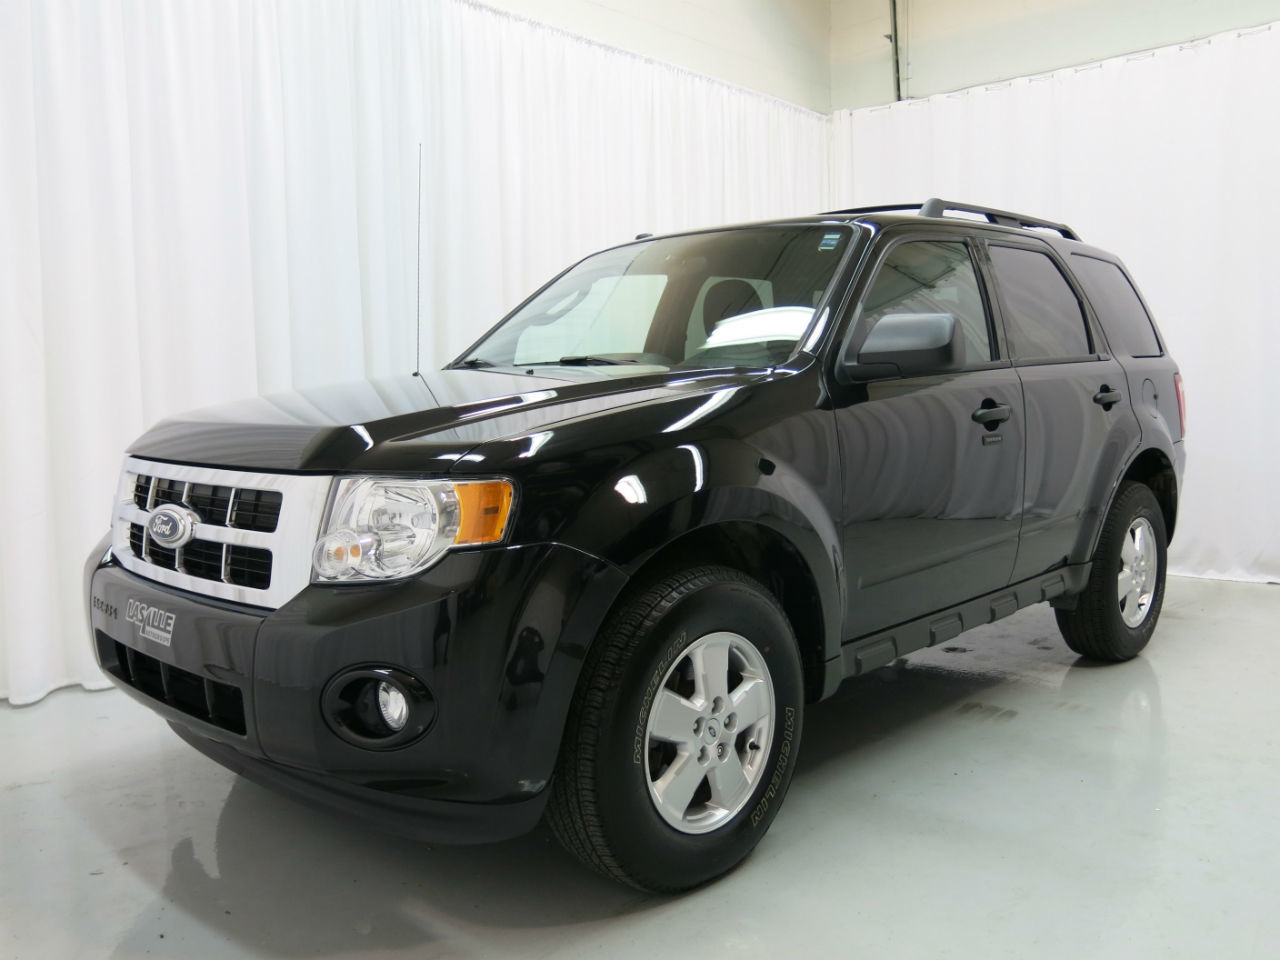 Buy used ford escape montreal